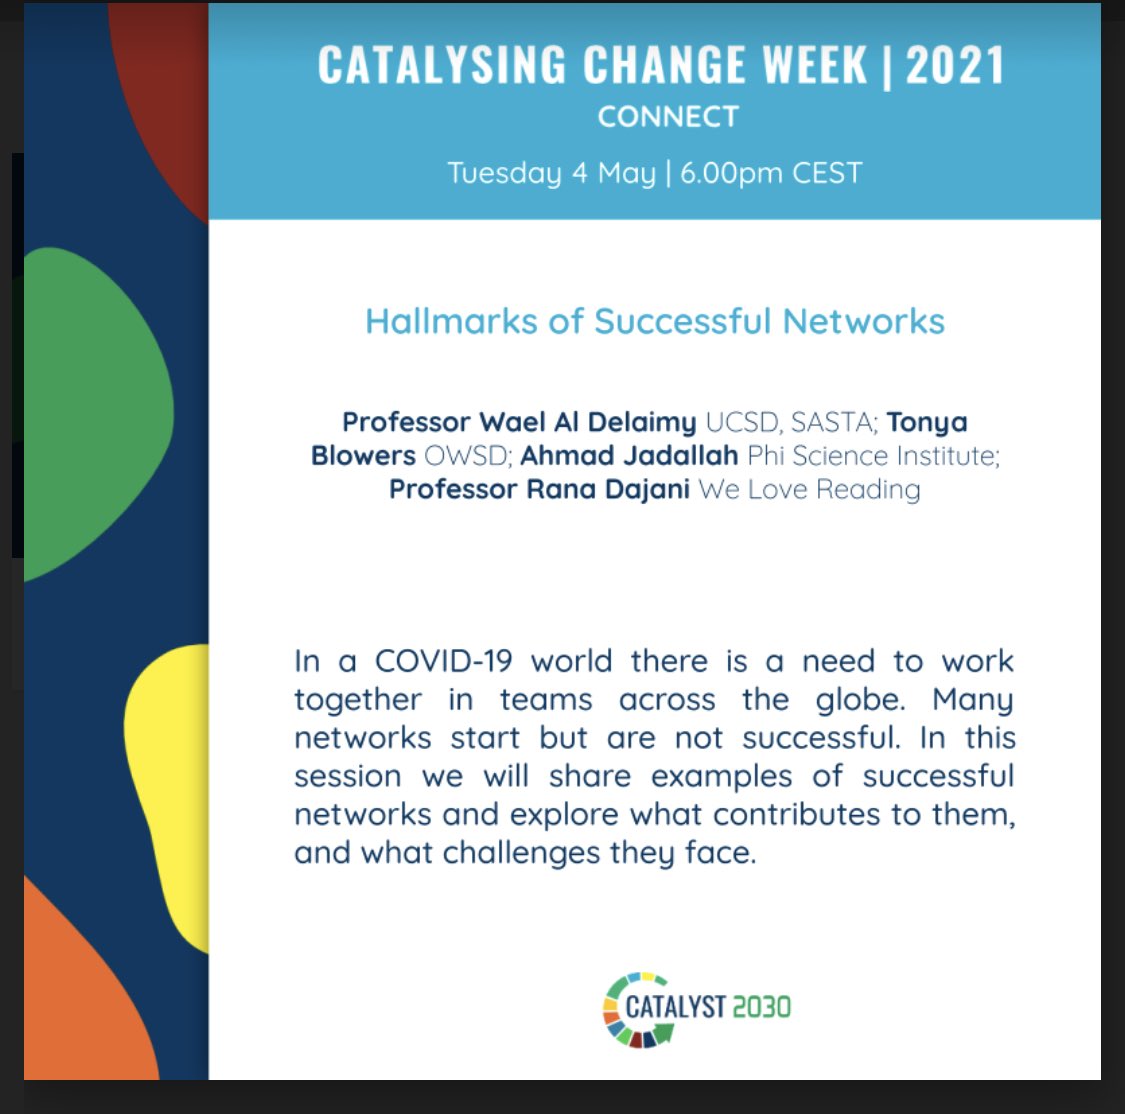 Join #CatalysingChangeWeek organised by @Catalyst_2030 during 3-7 May 2021 bringing together the world’s most innovative and inspiring #changemakers on #SDGs! Explore over 100 sessions and register to attend: 
buff.ly/3vmlhHs #CatalysingChange #AcceleratingAction